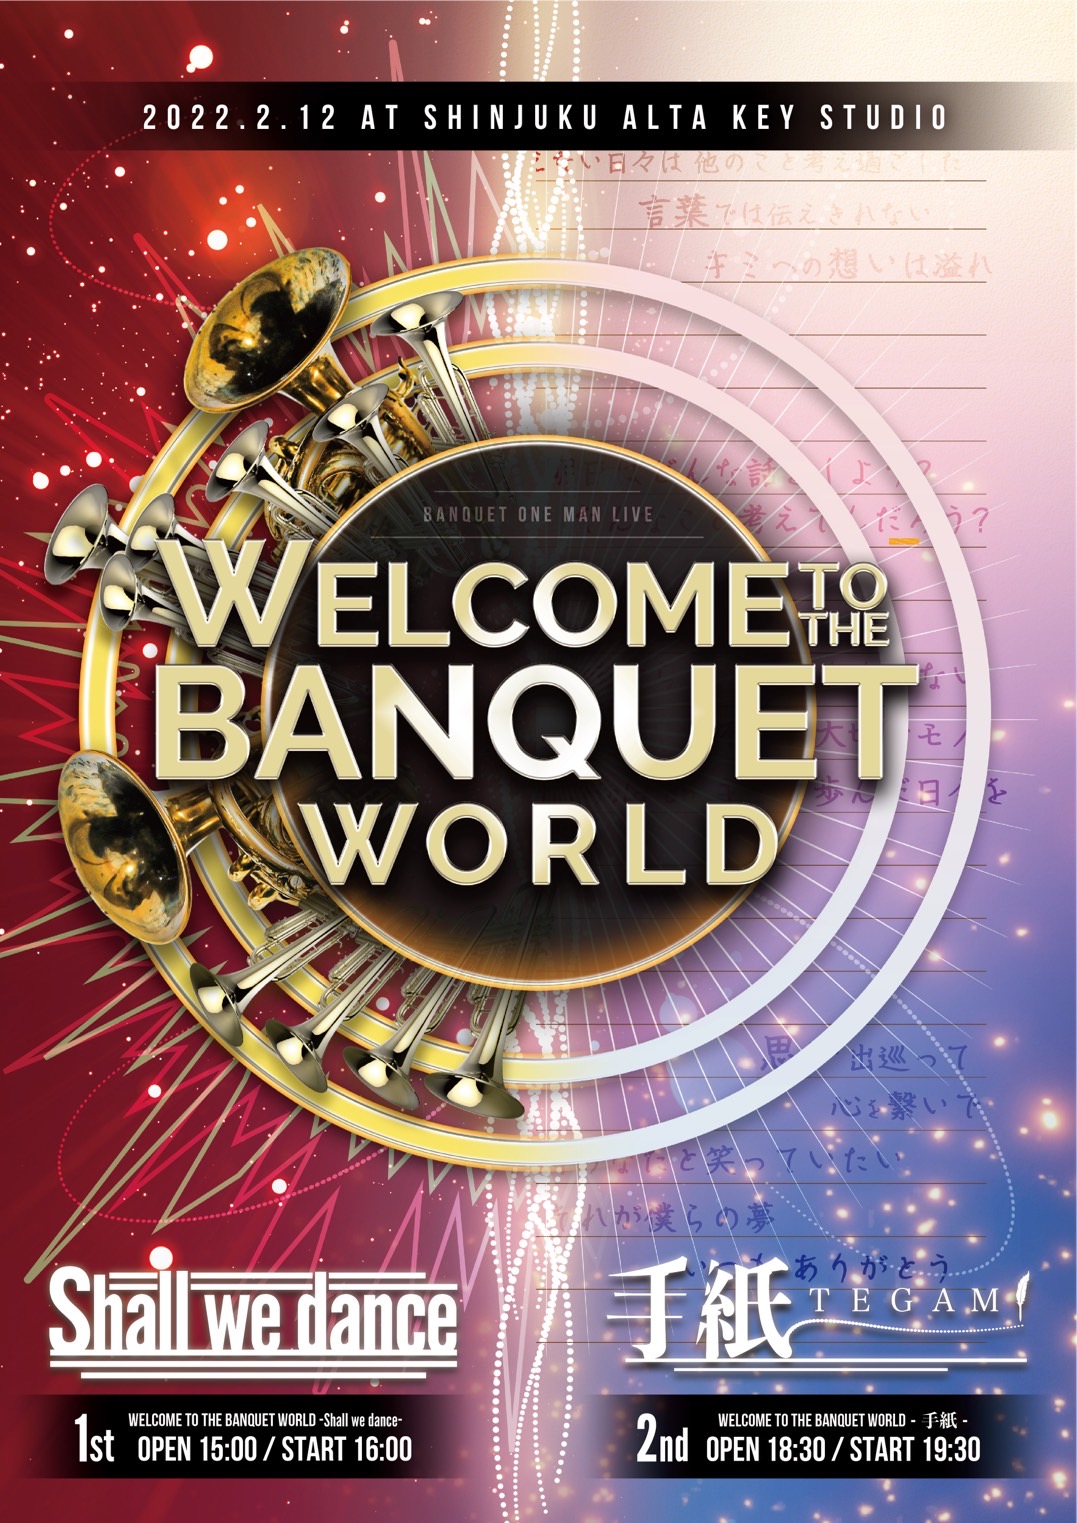 ONE MAN LIVE 【WELCOME TO THE BANQUET WORLD】開催決定❗️❗️